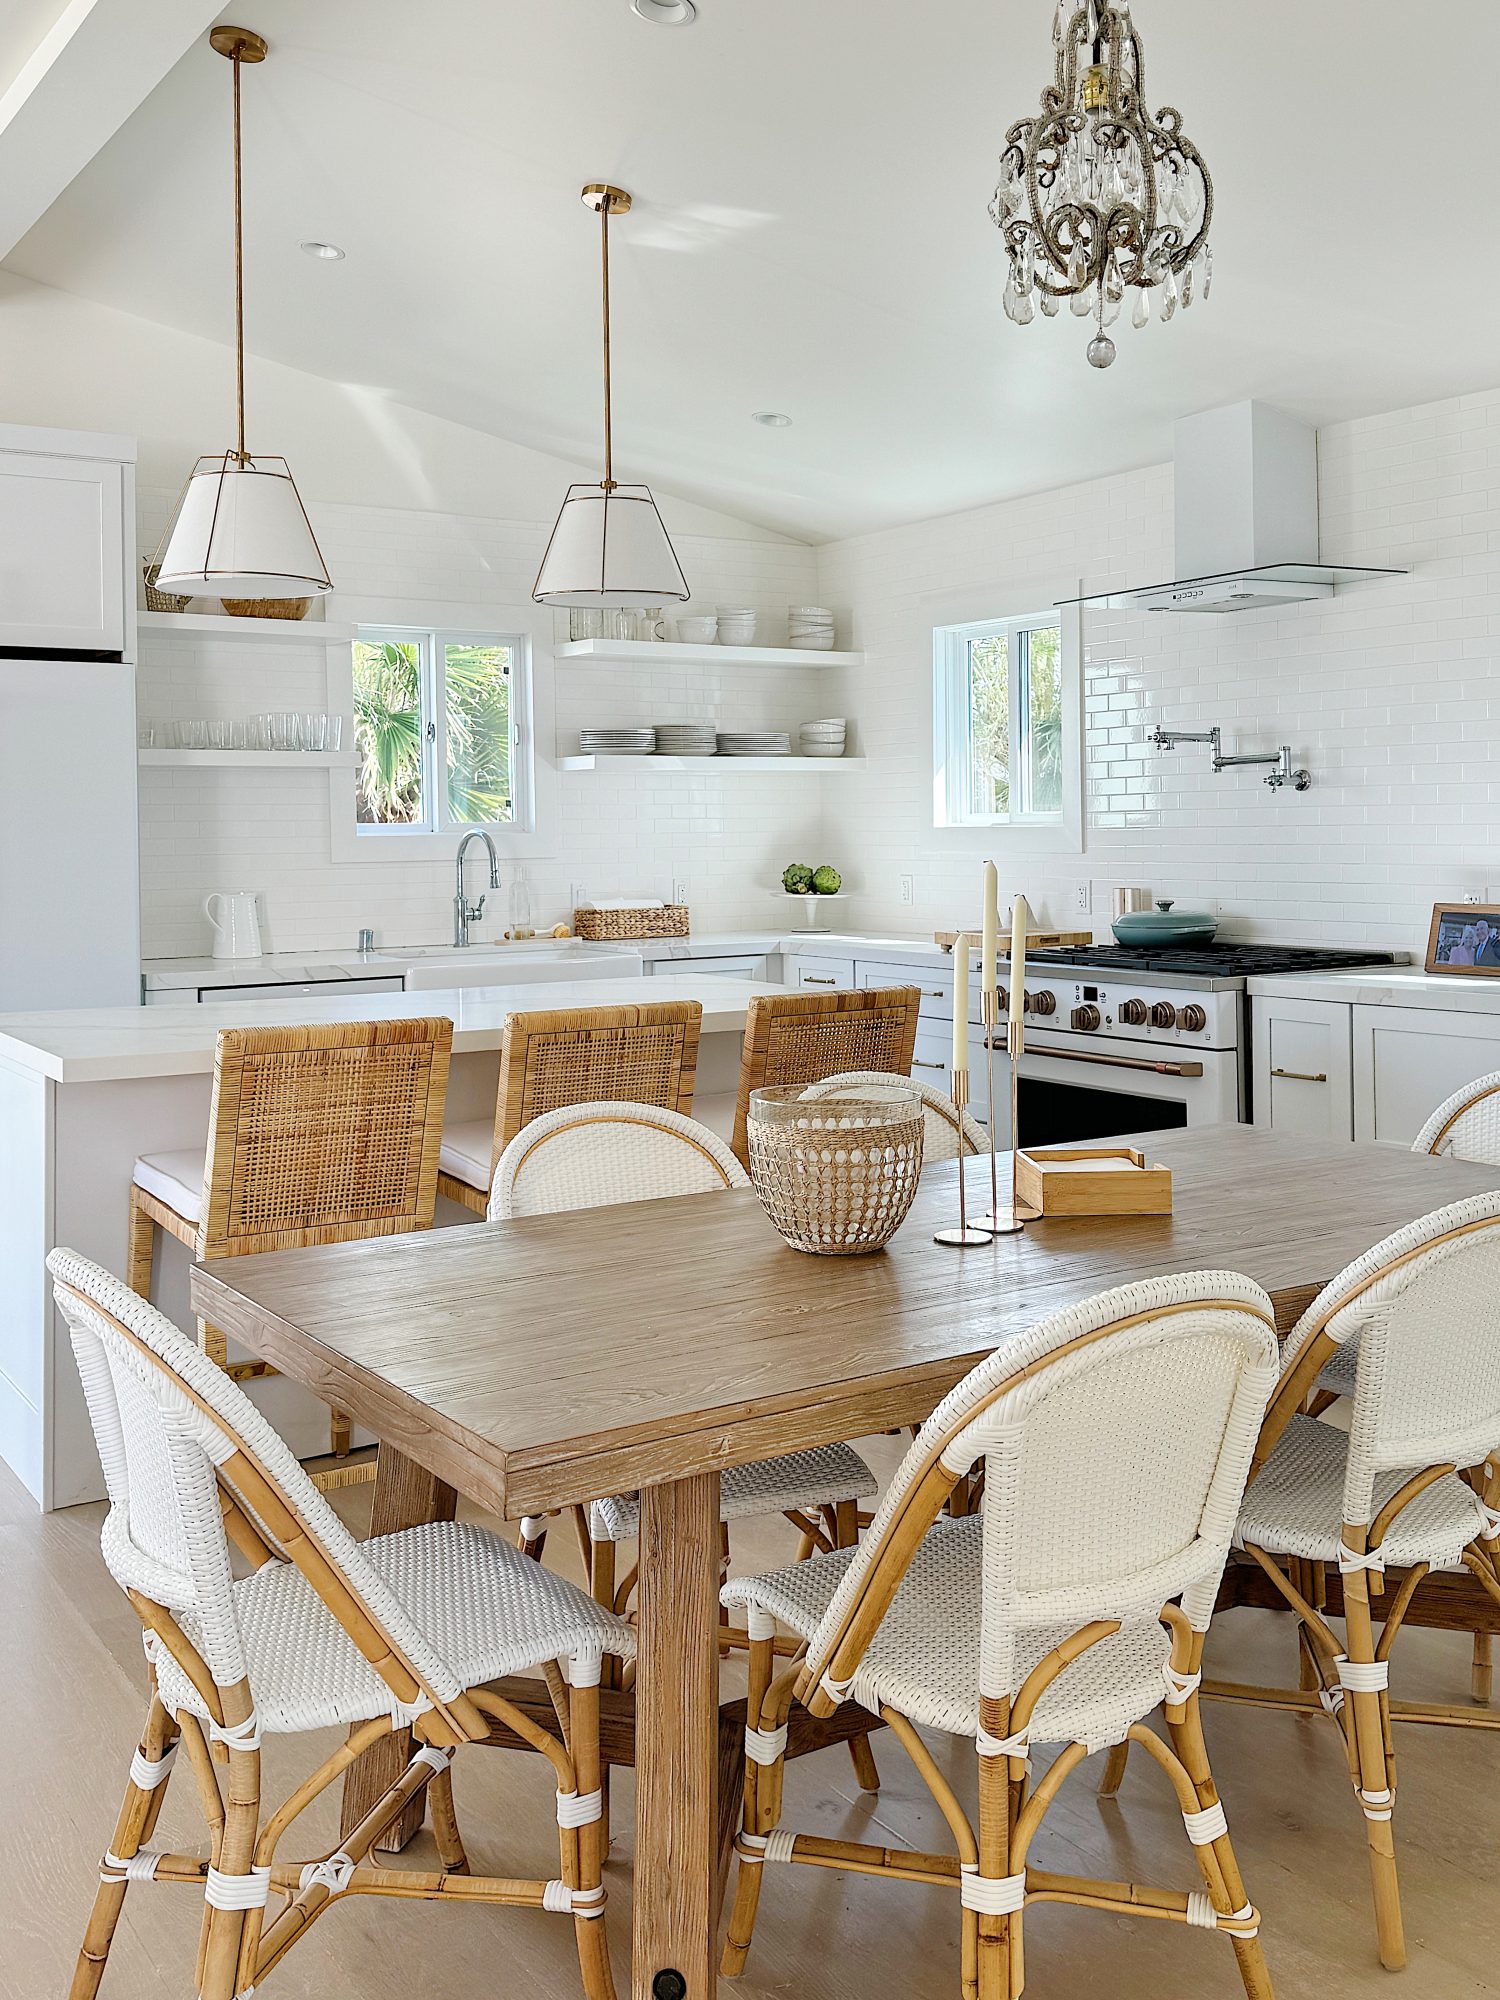 Bright, modern kitchen with wooden dining table, wicker chairs, white cabinets, and hanging pendant lights.